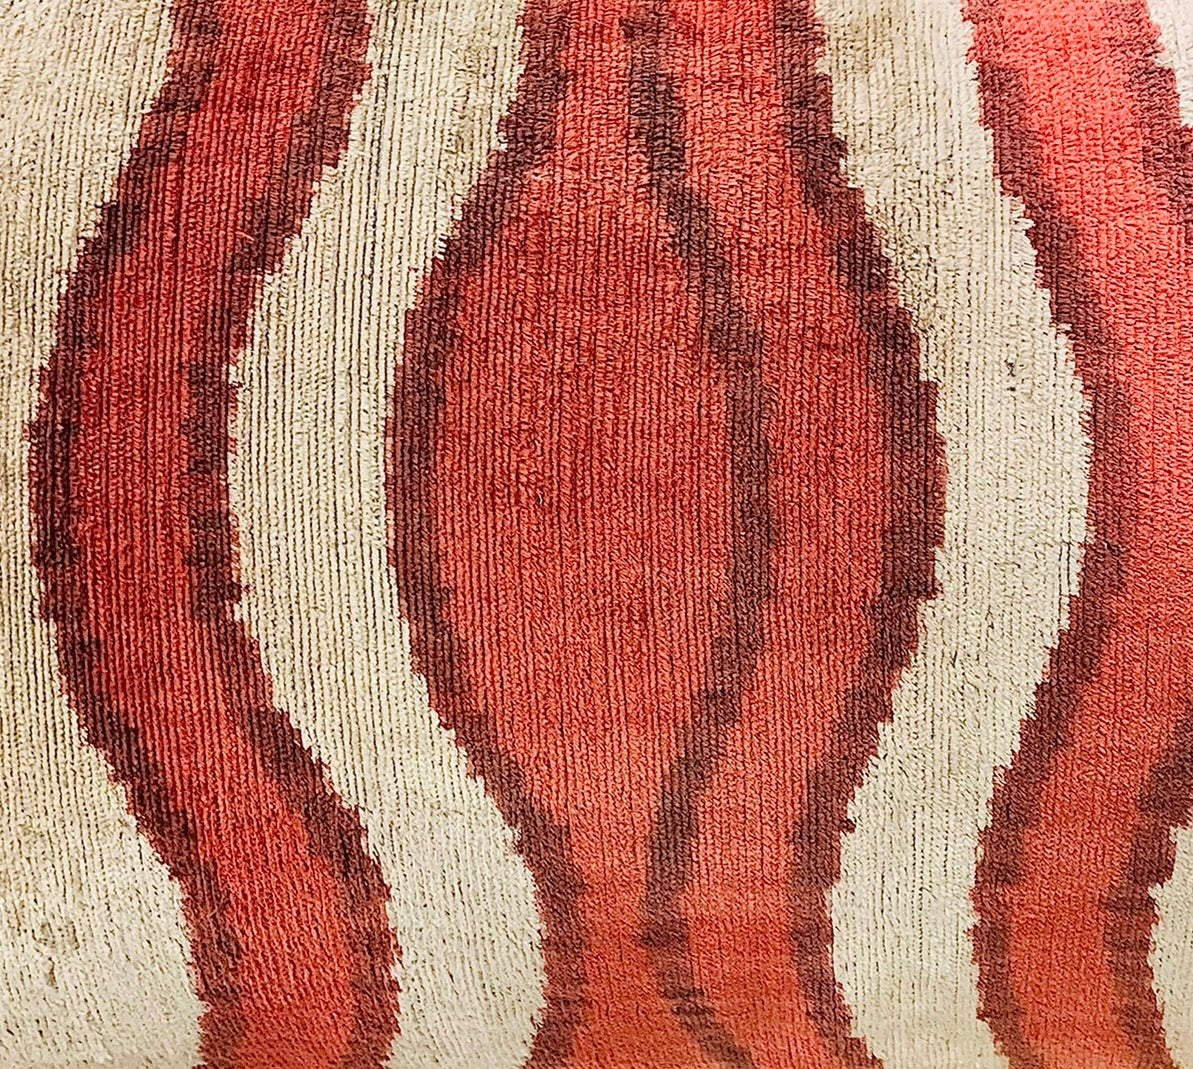 Red And Cream Ikat Pillow